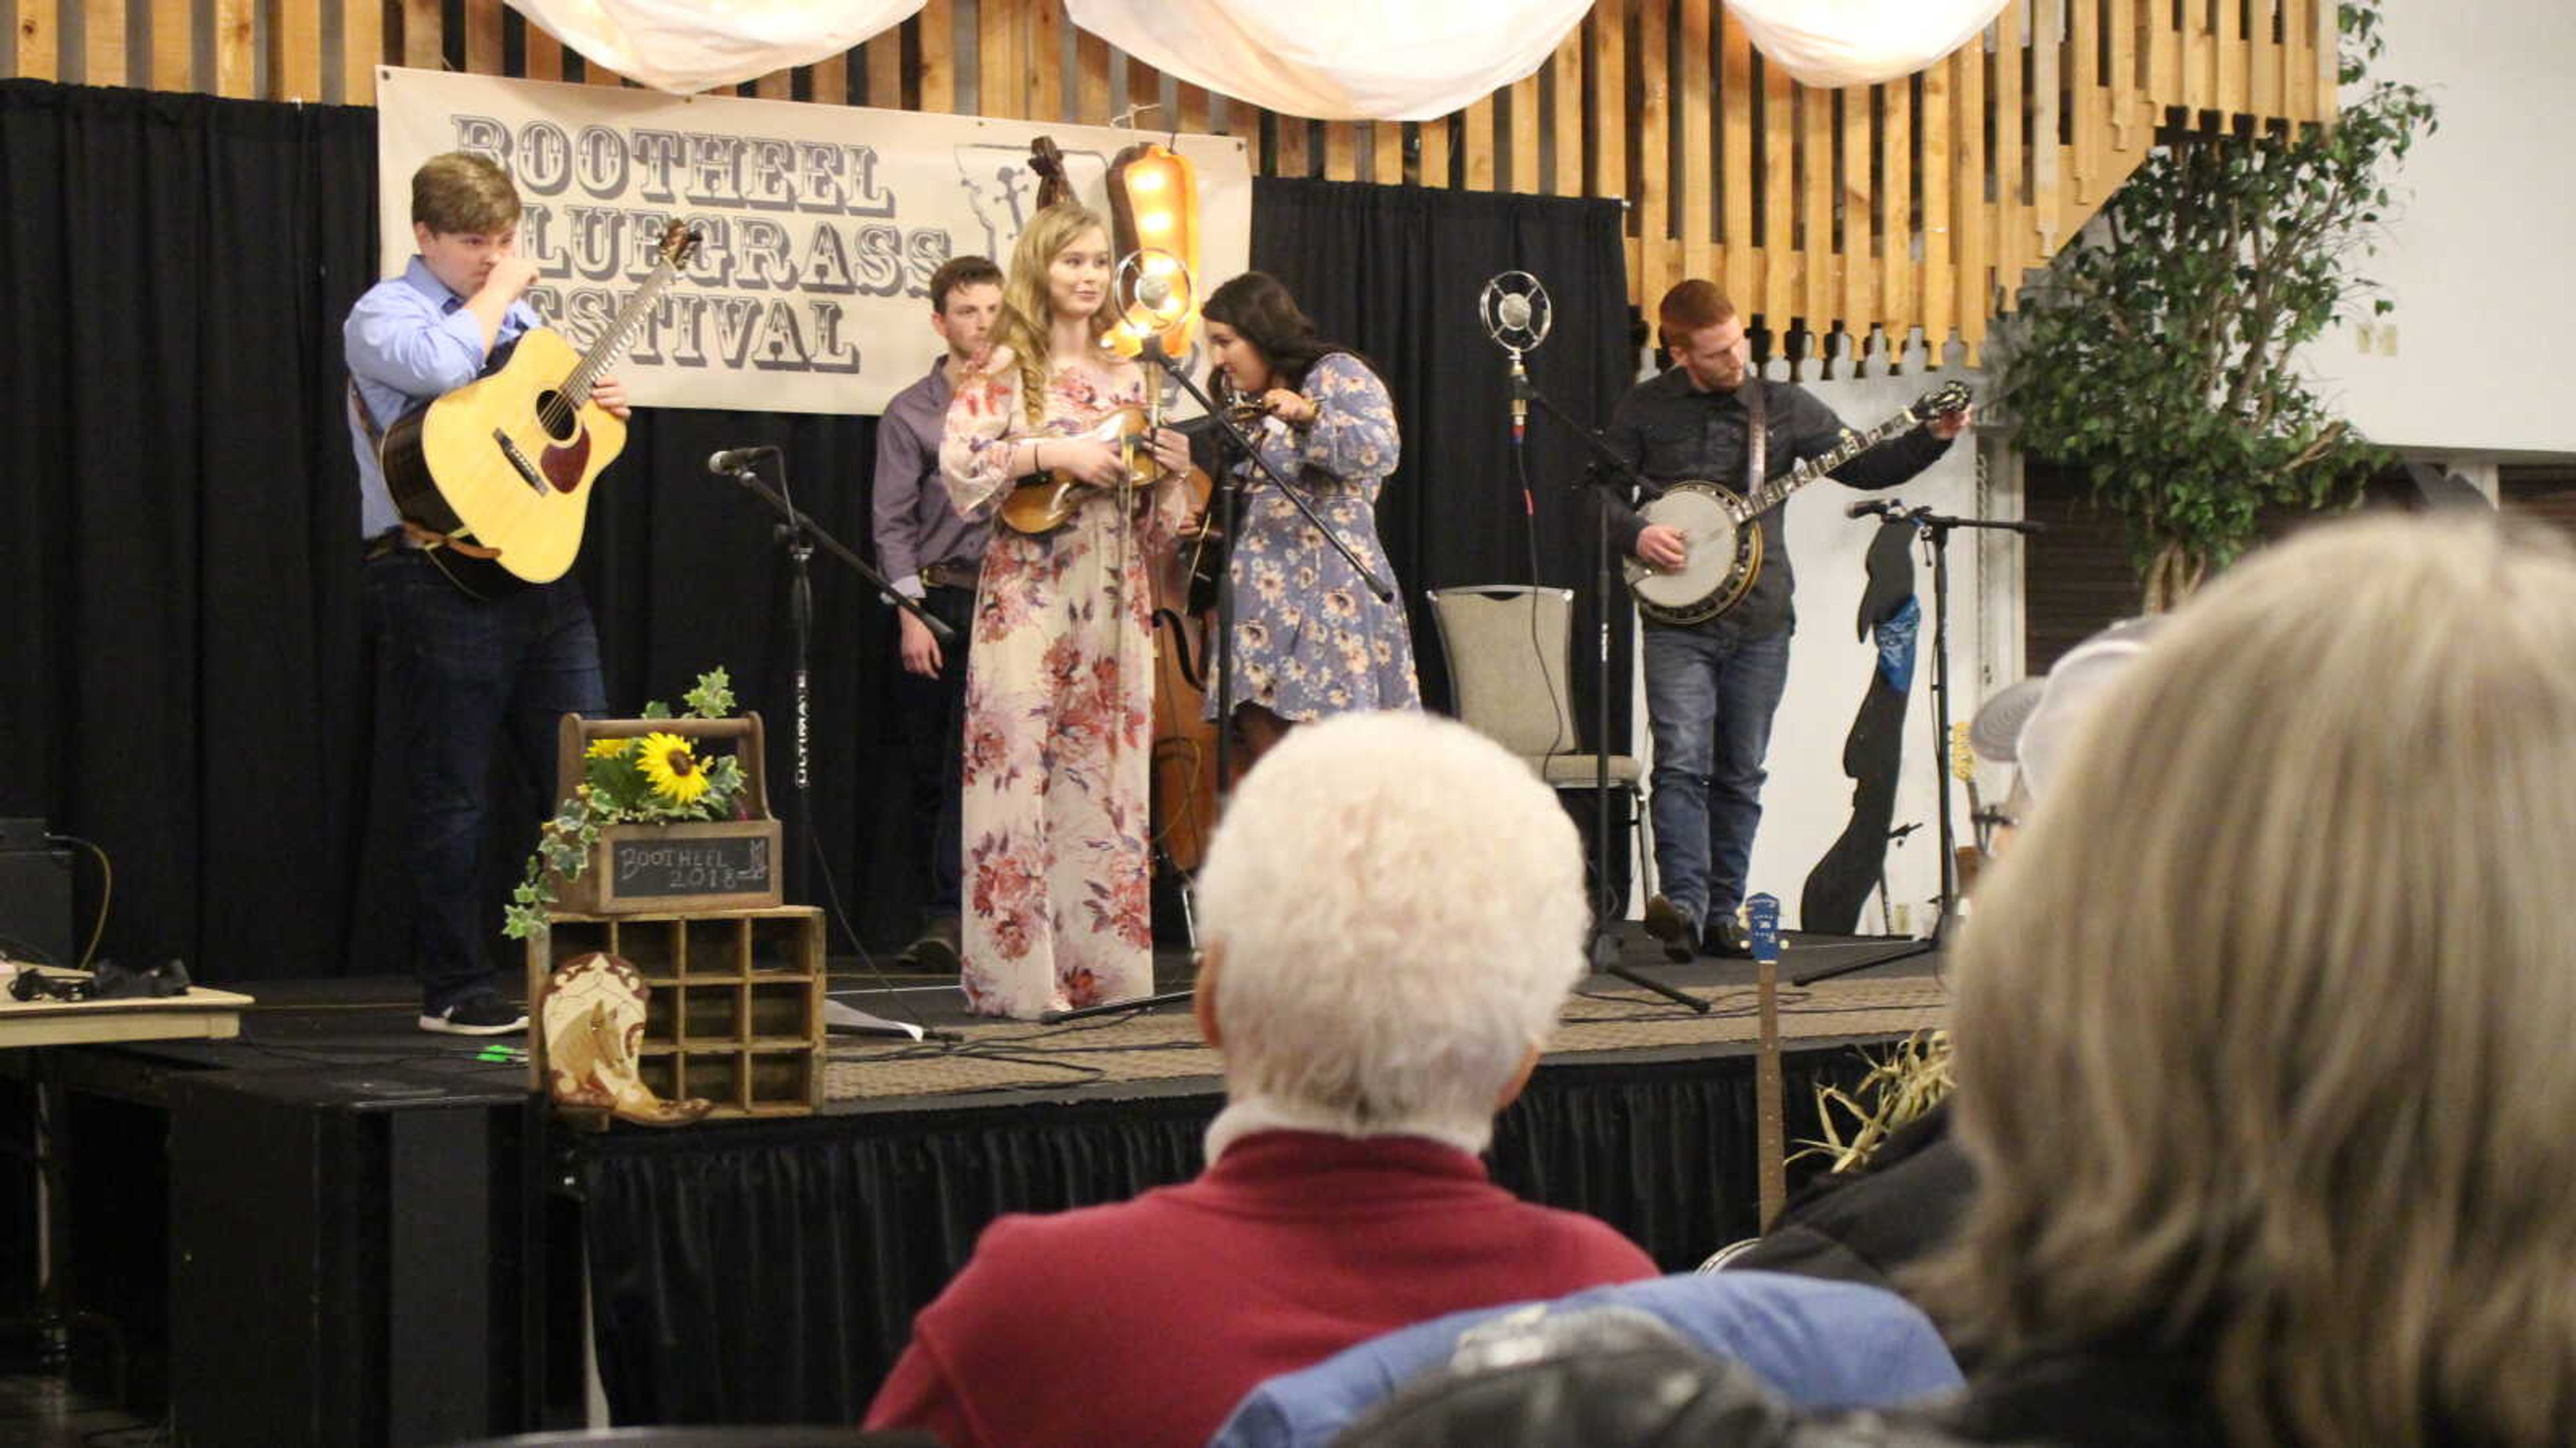 Po' Anna, a five-piece bluegrass band, tunes up between songs at the Bootheel Bluegrass Festival at the Bavarian Halle in Jackson Jan. 25 to 27.